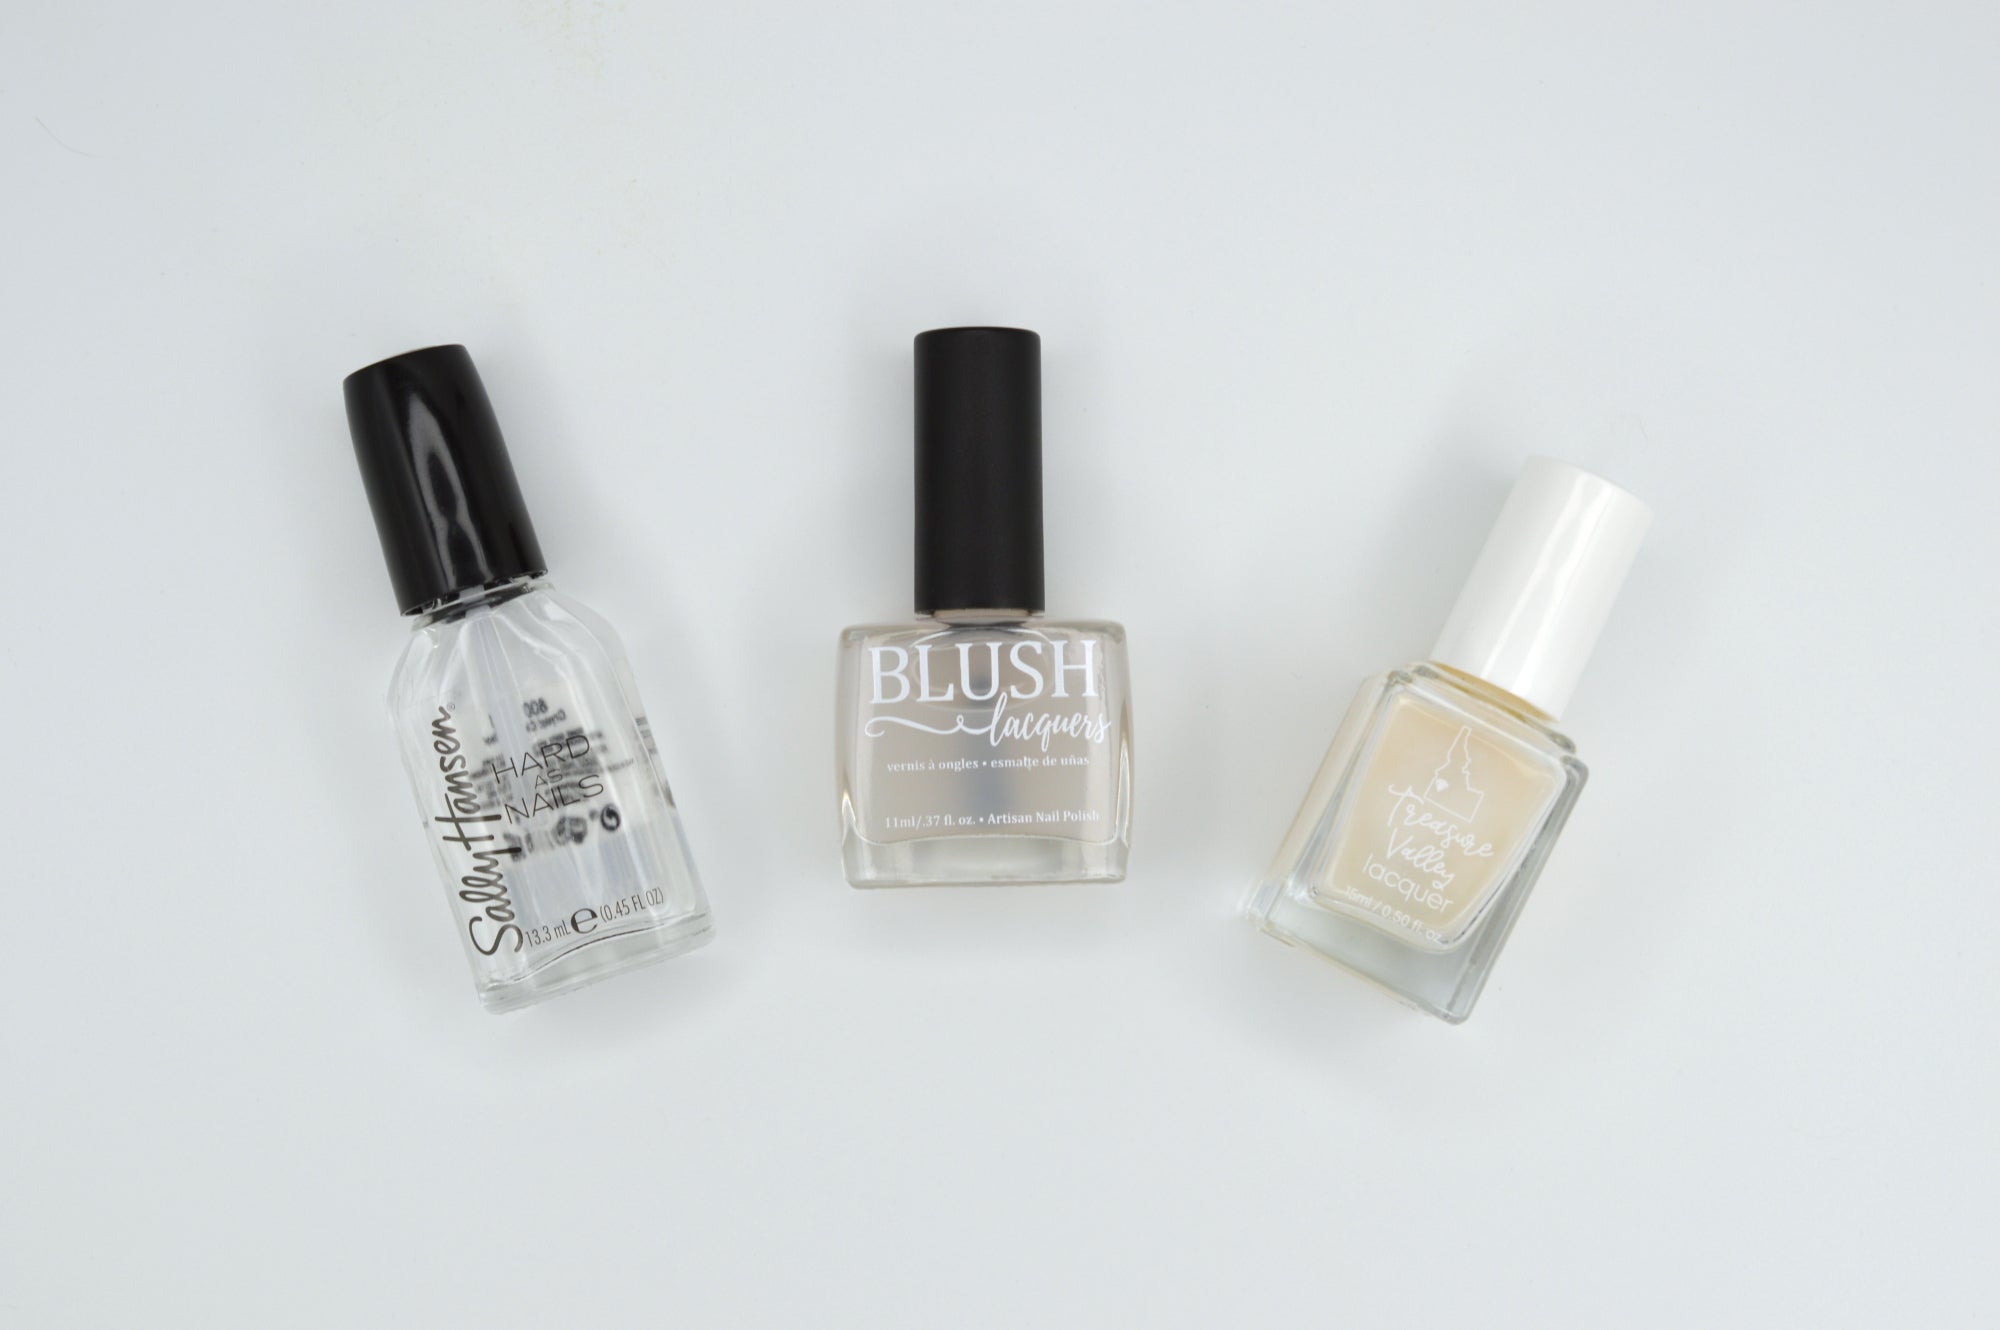 A Comprehensive Guide To Painting Your Nails, Part 2: Tips, Tricks & Techniques For Painting Your Nails - BLUSH